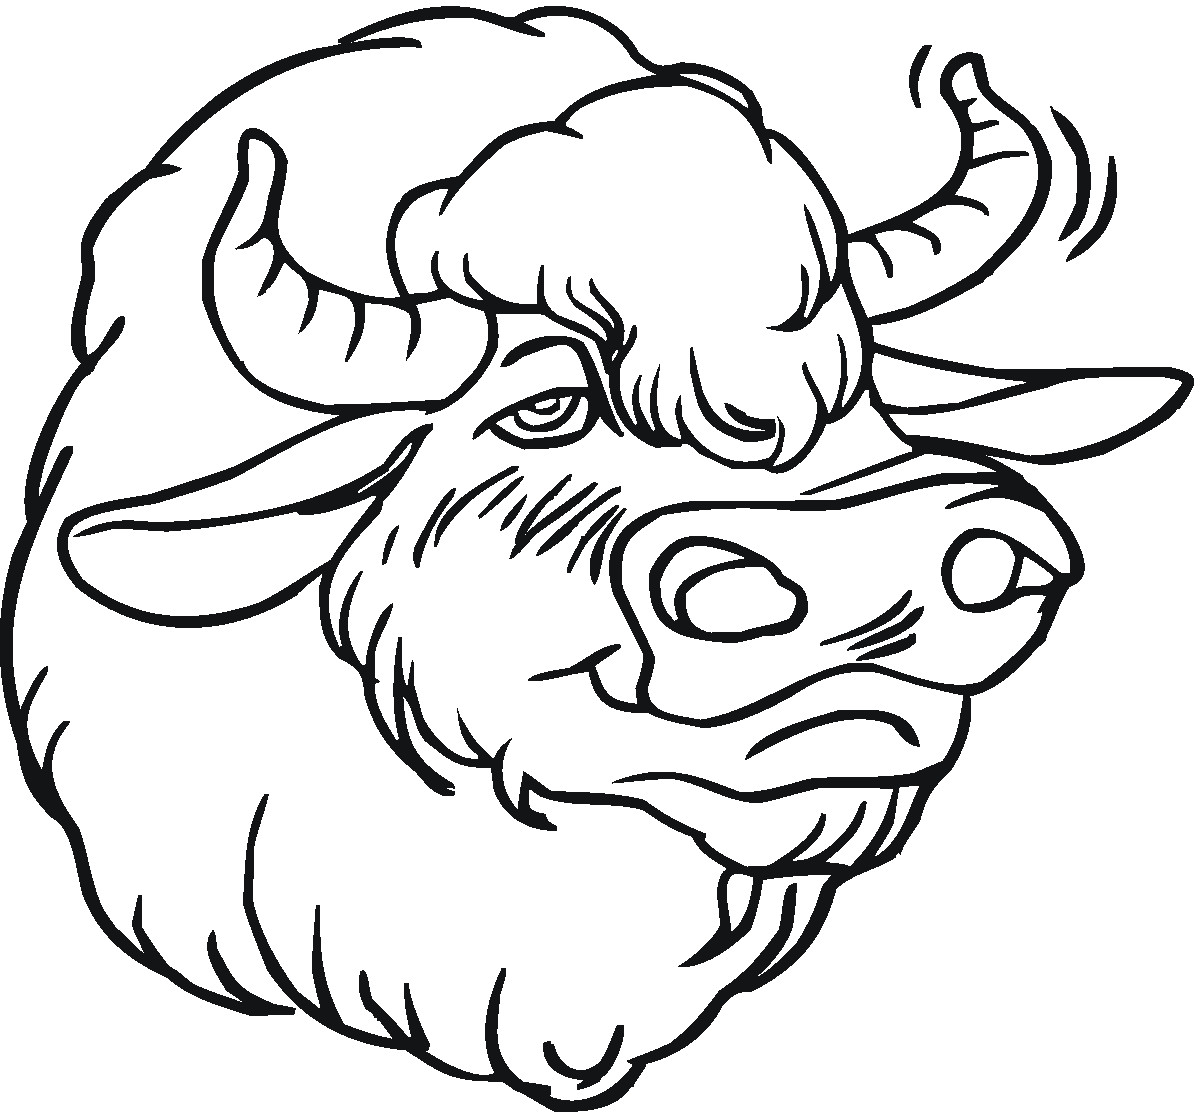 Coloring Pages For Boys Bufulo
 Free Buffalo and Bison Coloring Pages